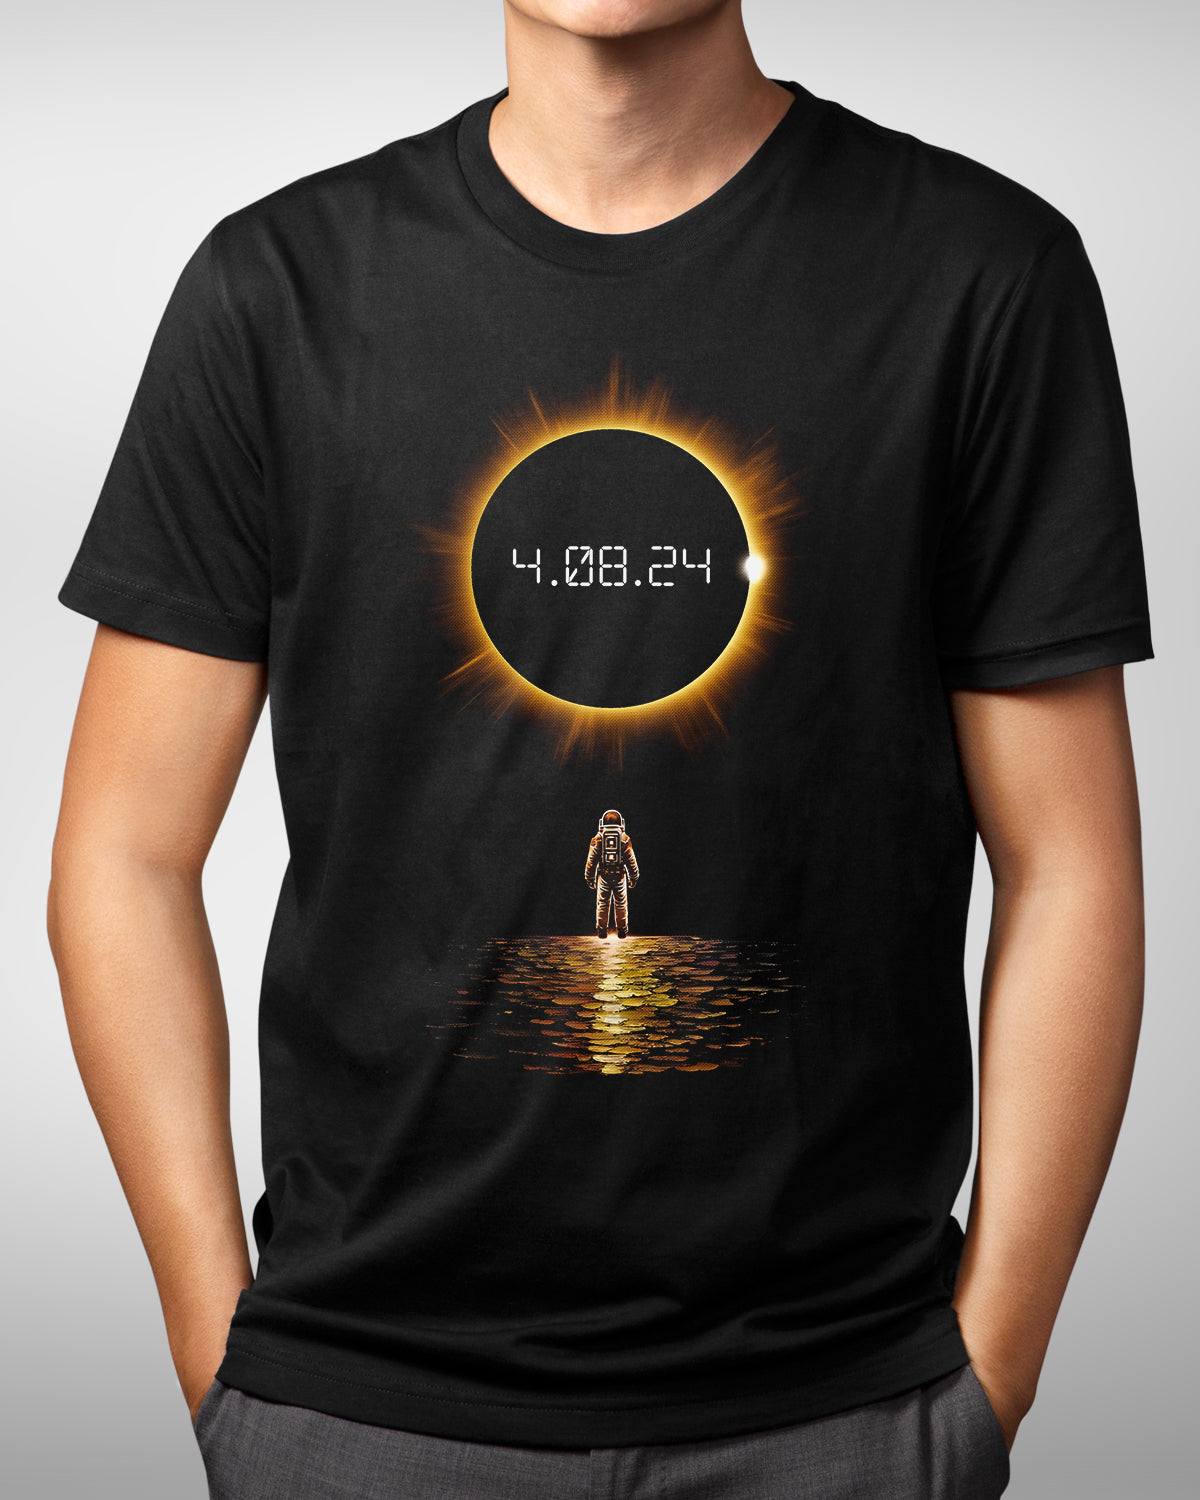 Total Solar Eclipse Shirt April 8th 2024 - America Totality - Astronomy Science Moon Space